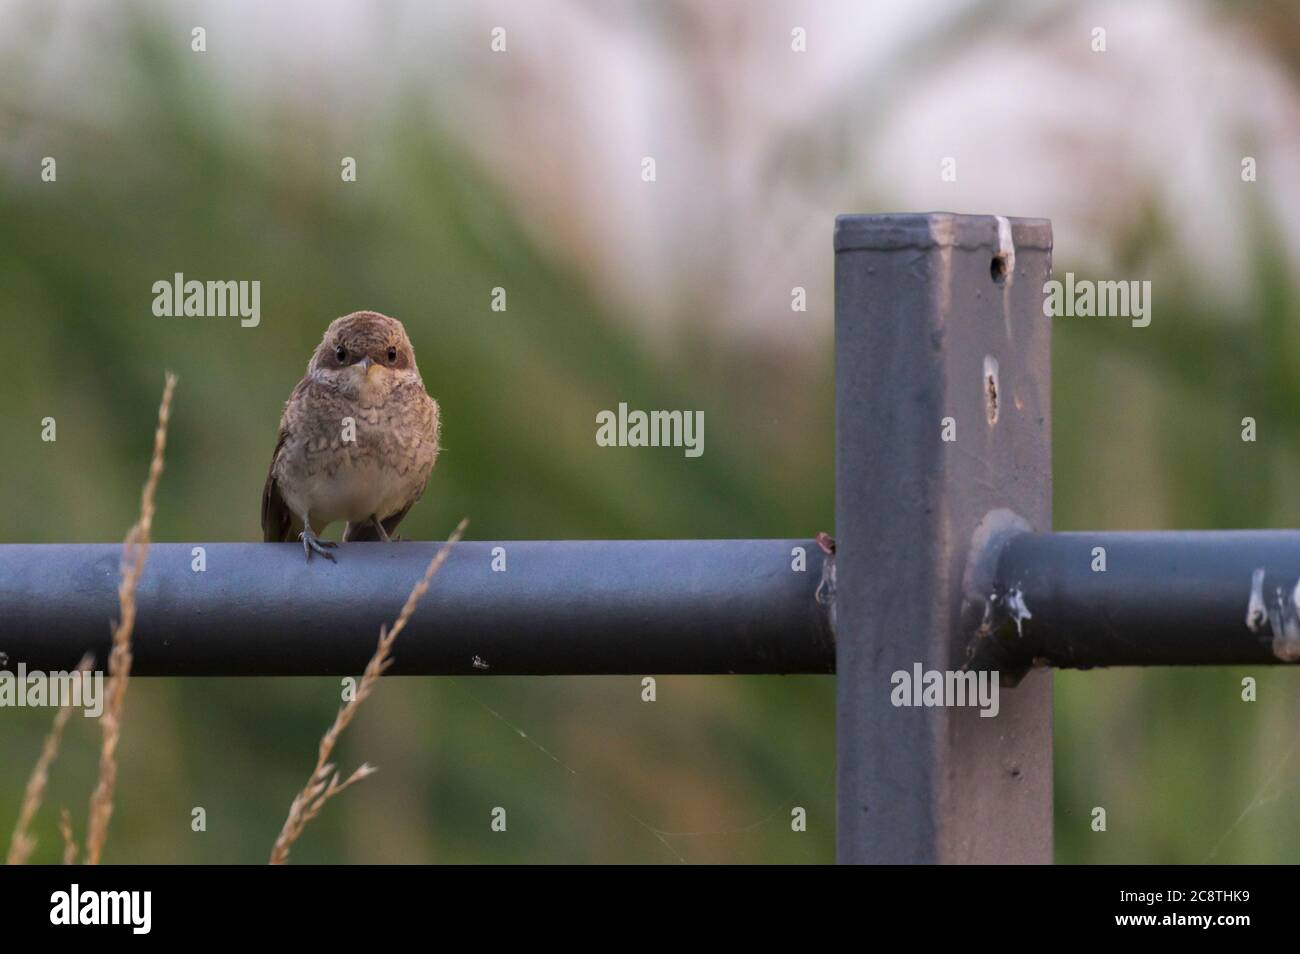 Young bird of a red-backed shrike sitting on a rail Stock Photo